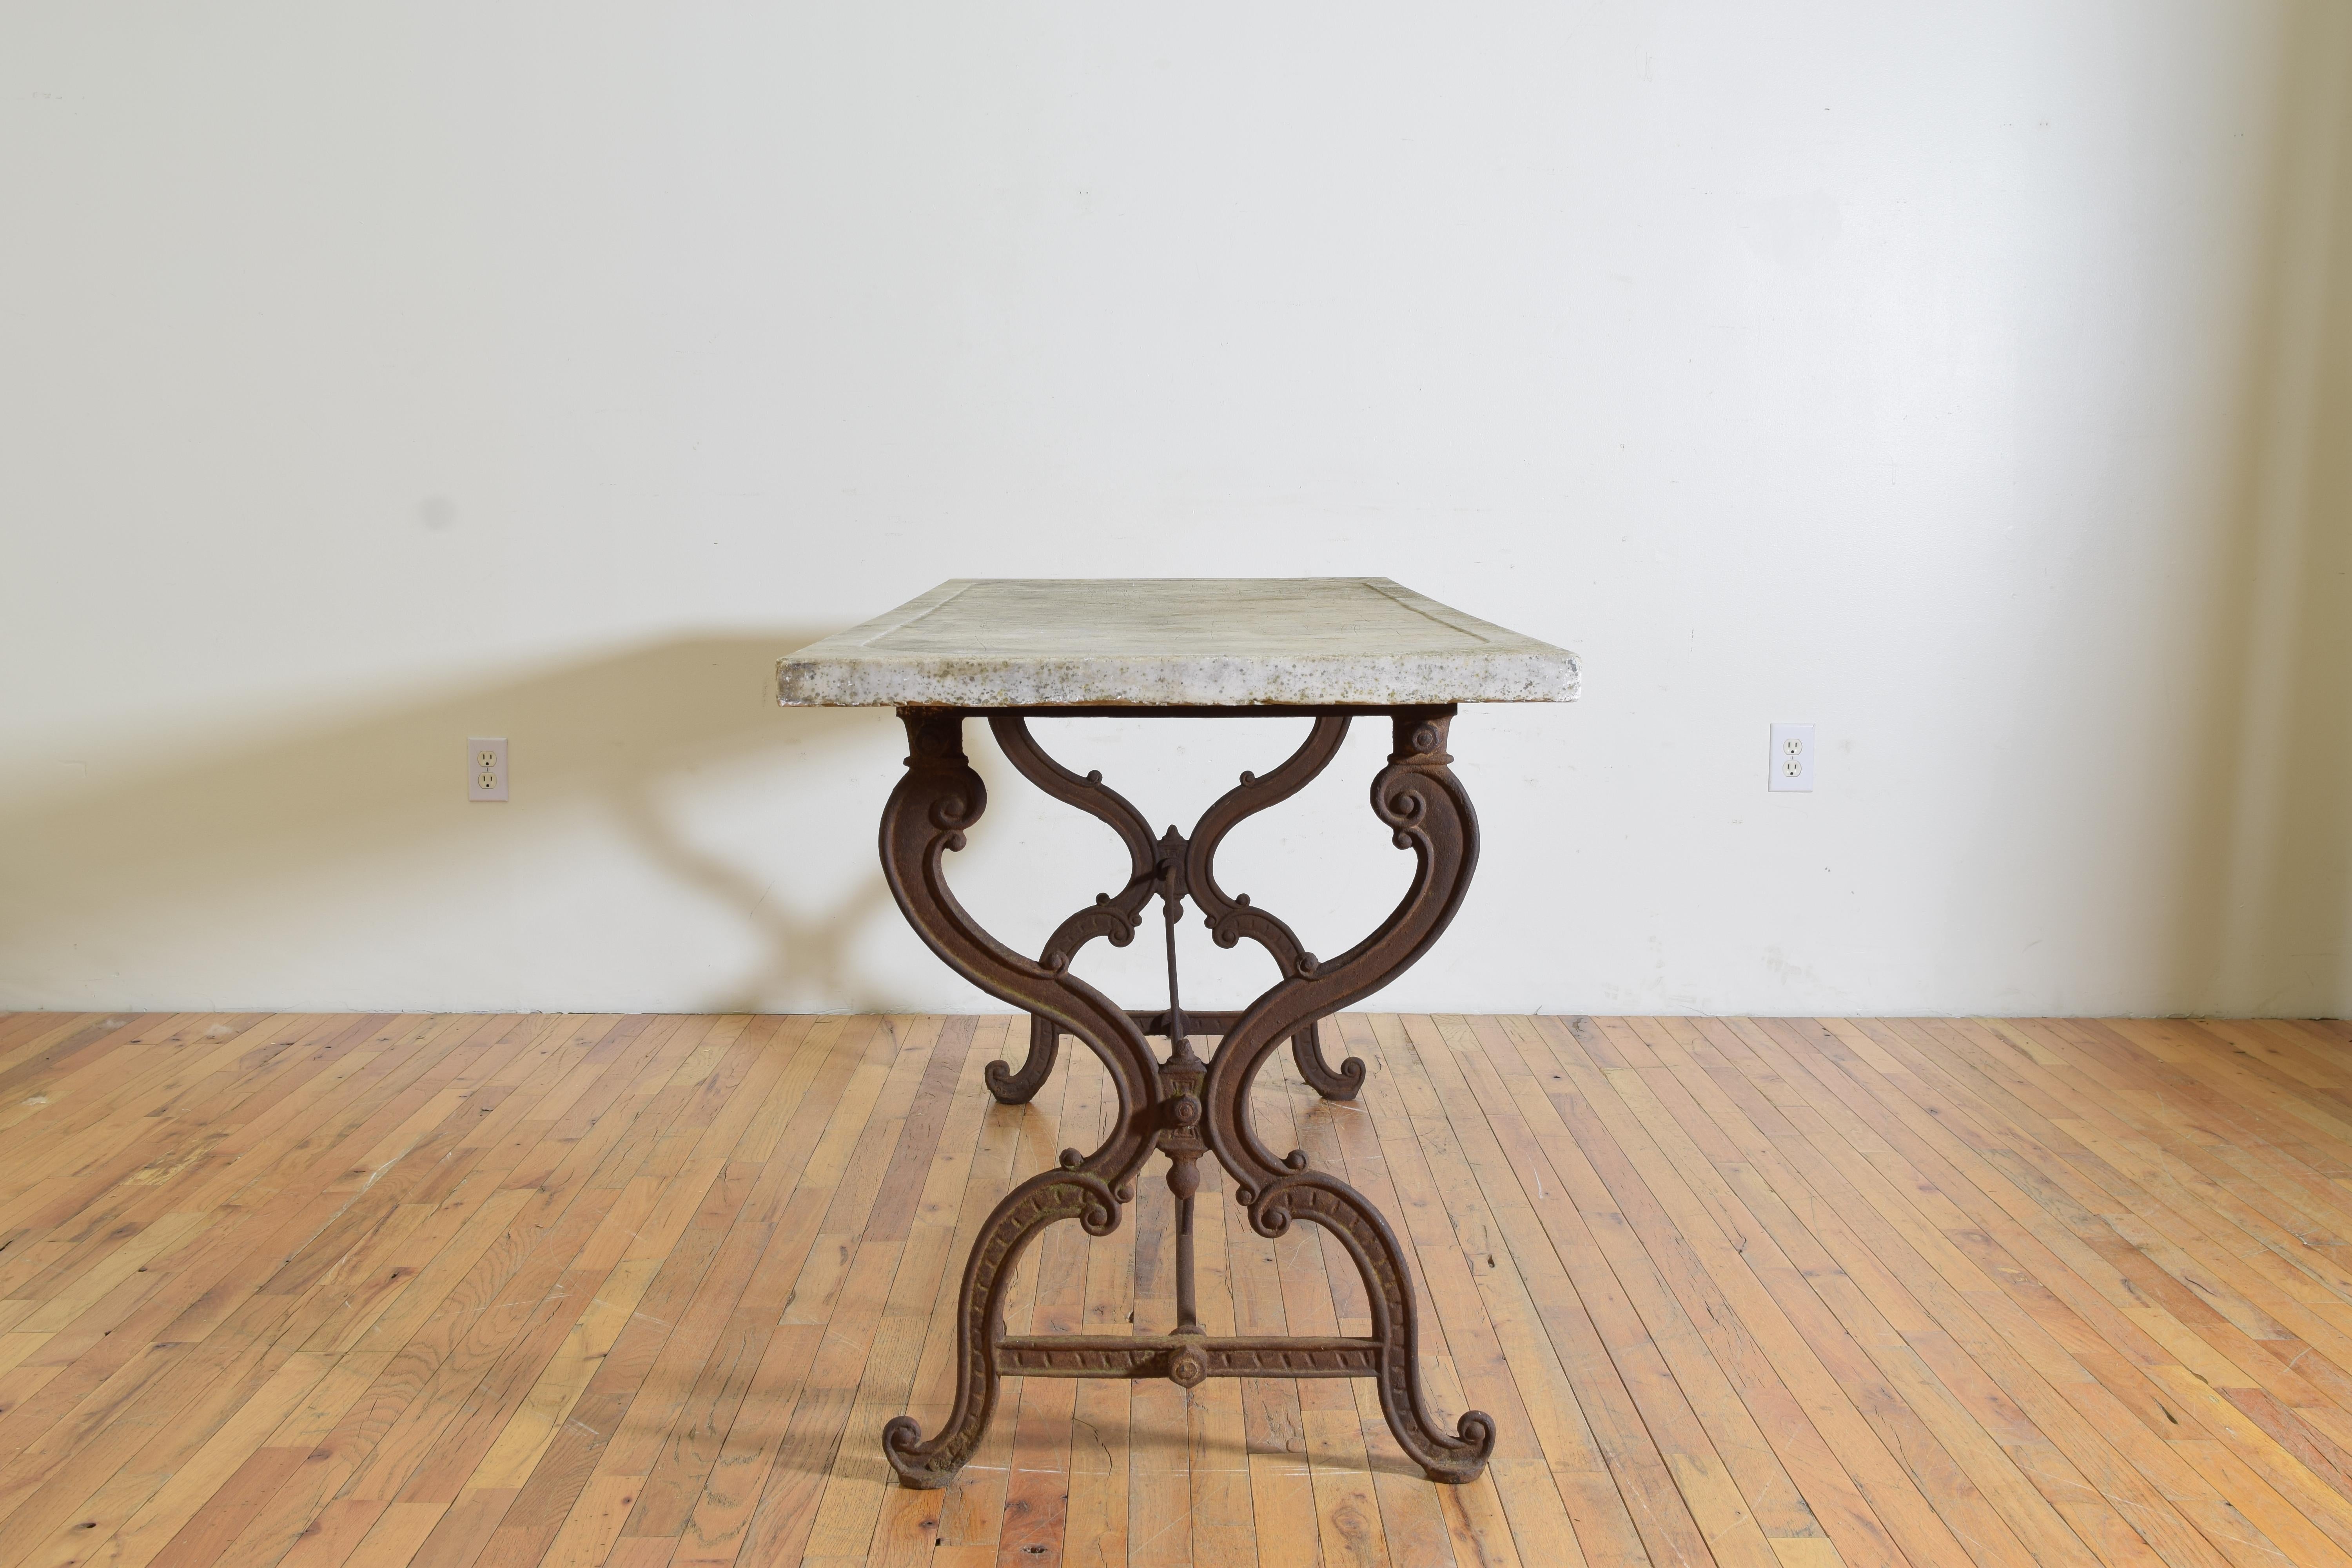 Late 19th Century French Late Victorian Wrought Iron & Marble Gardener’s Table, lastq 19th cen. For Sale